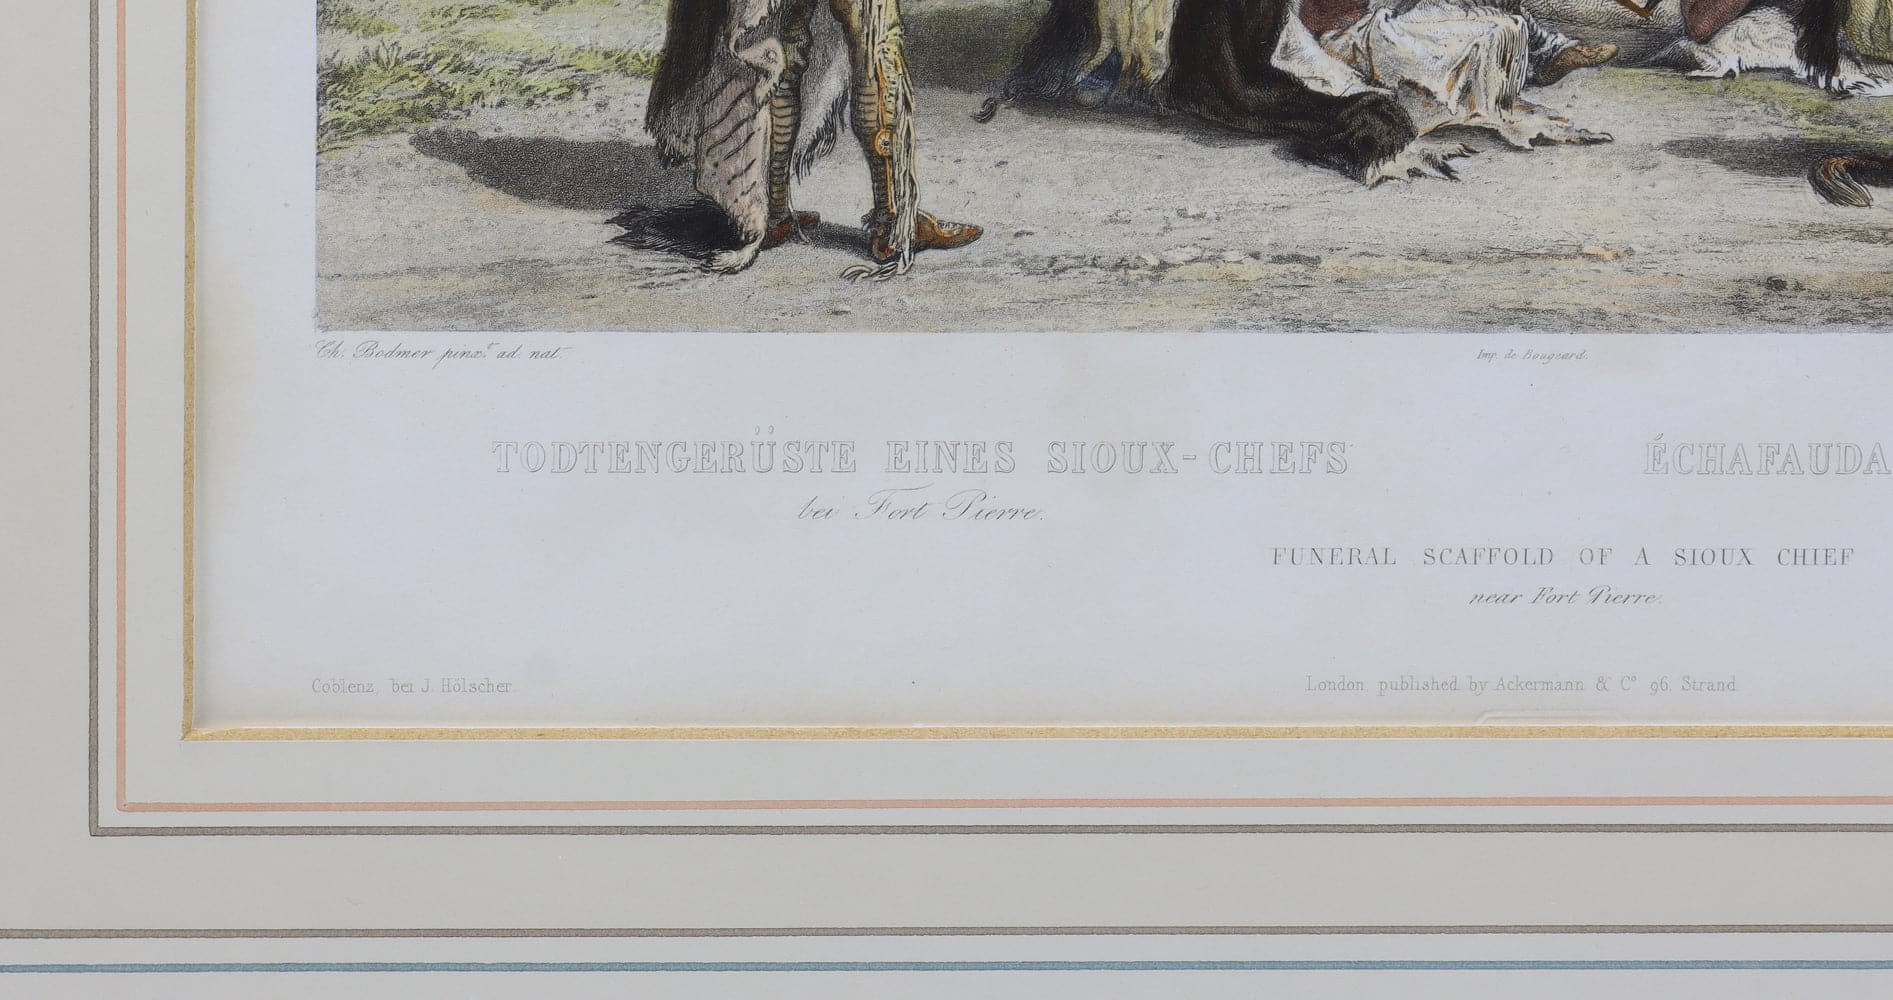 After Karl Bodmer (1809-1893) - Funeral Scaffold of a Sioux Chief (PDC92482-0220-043) 1
